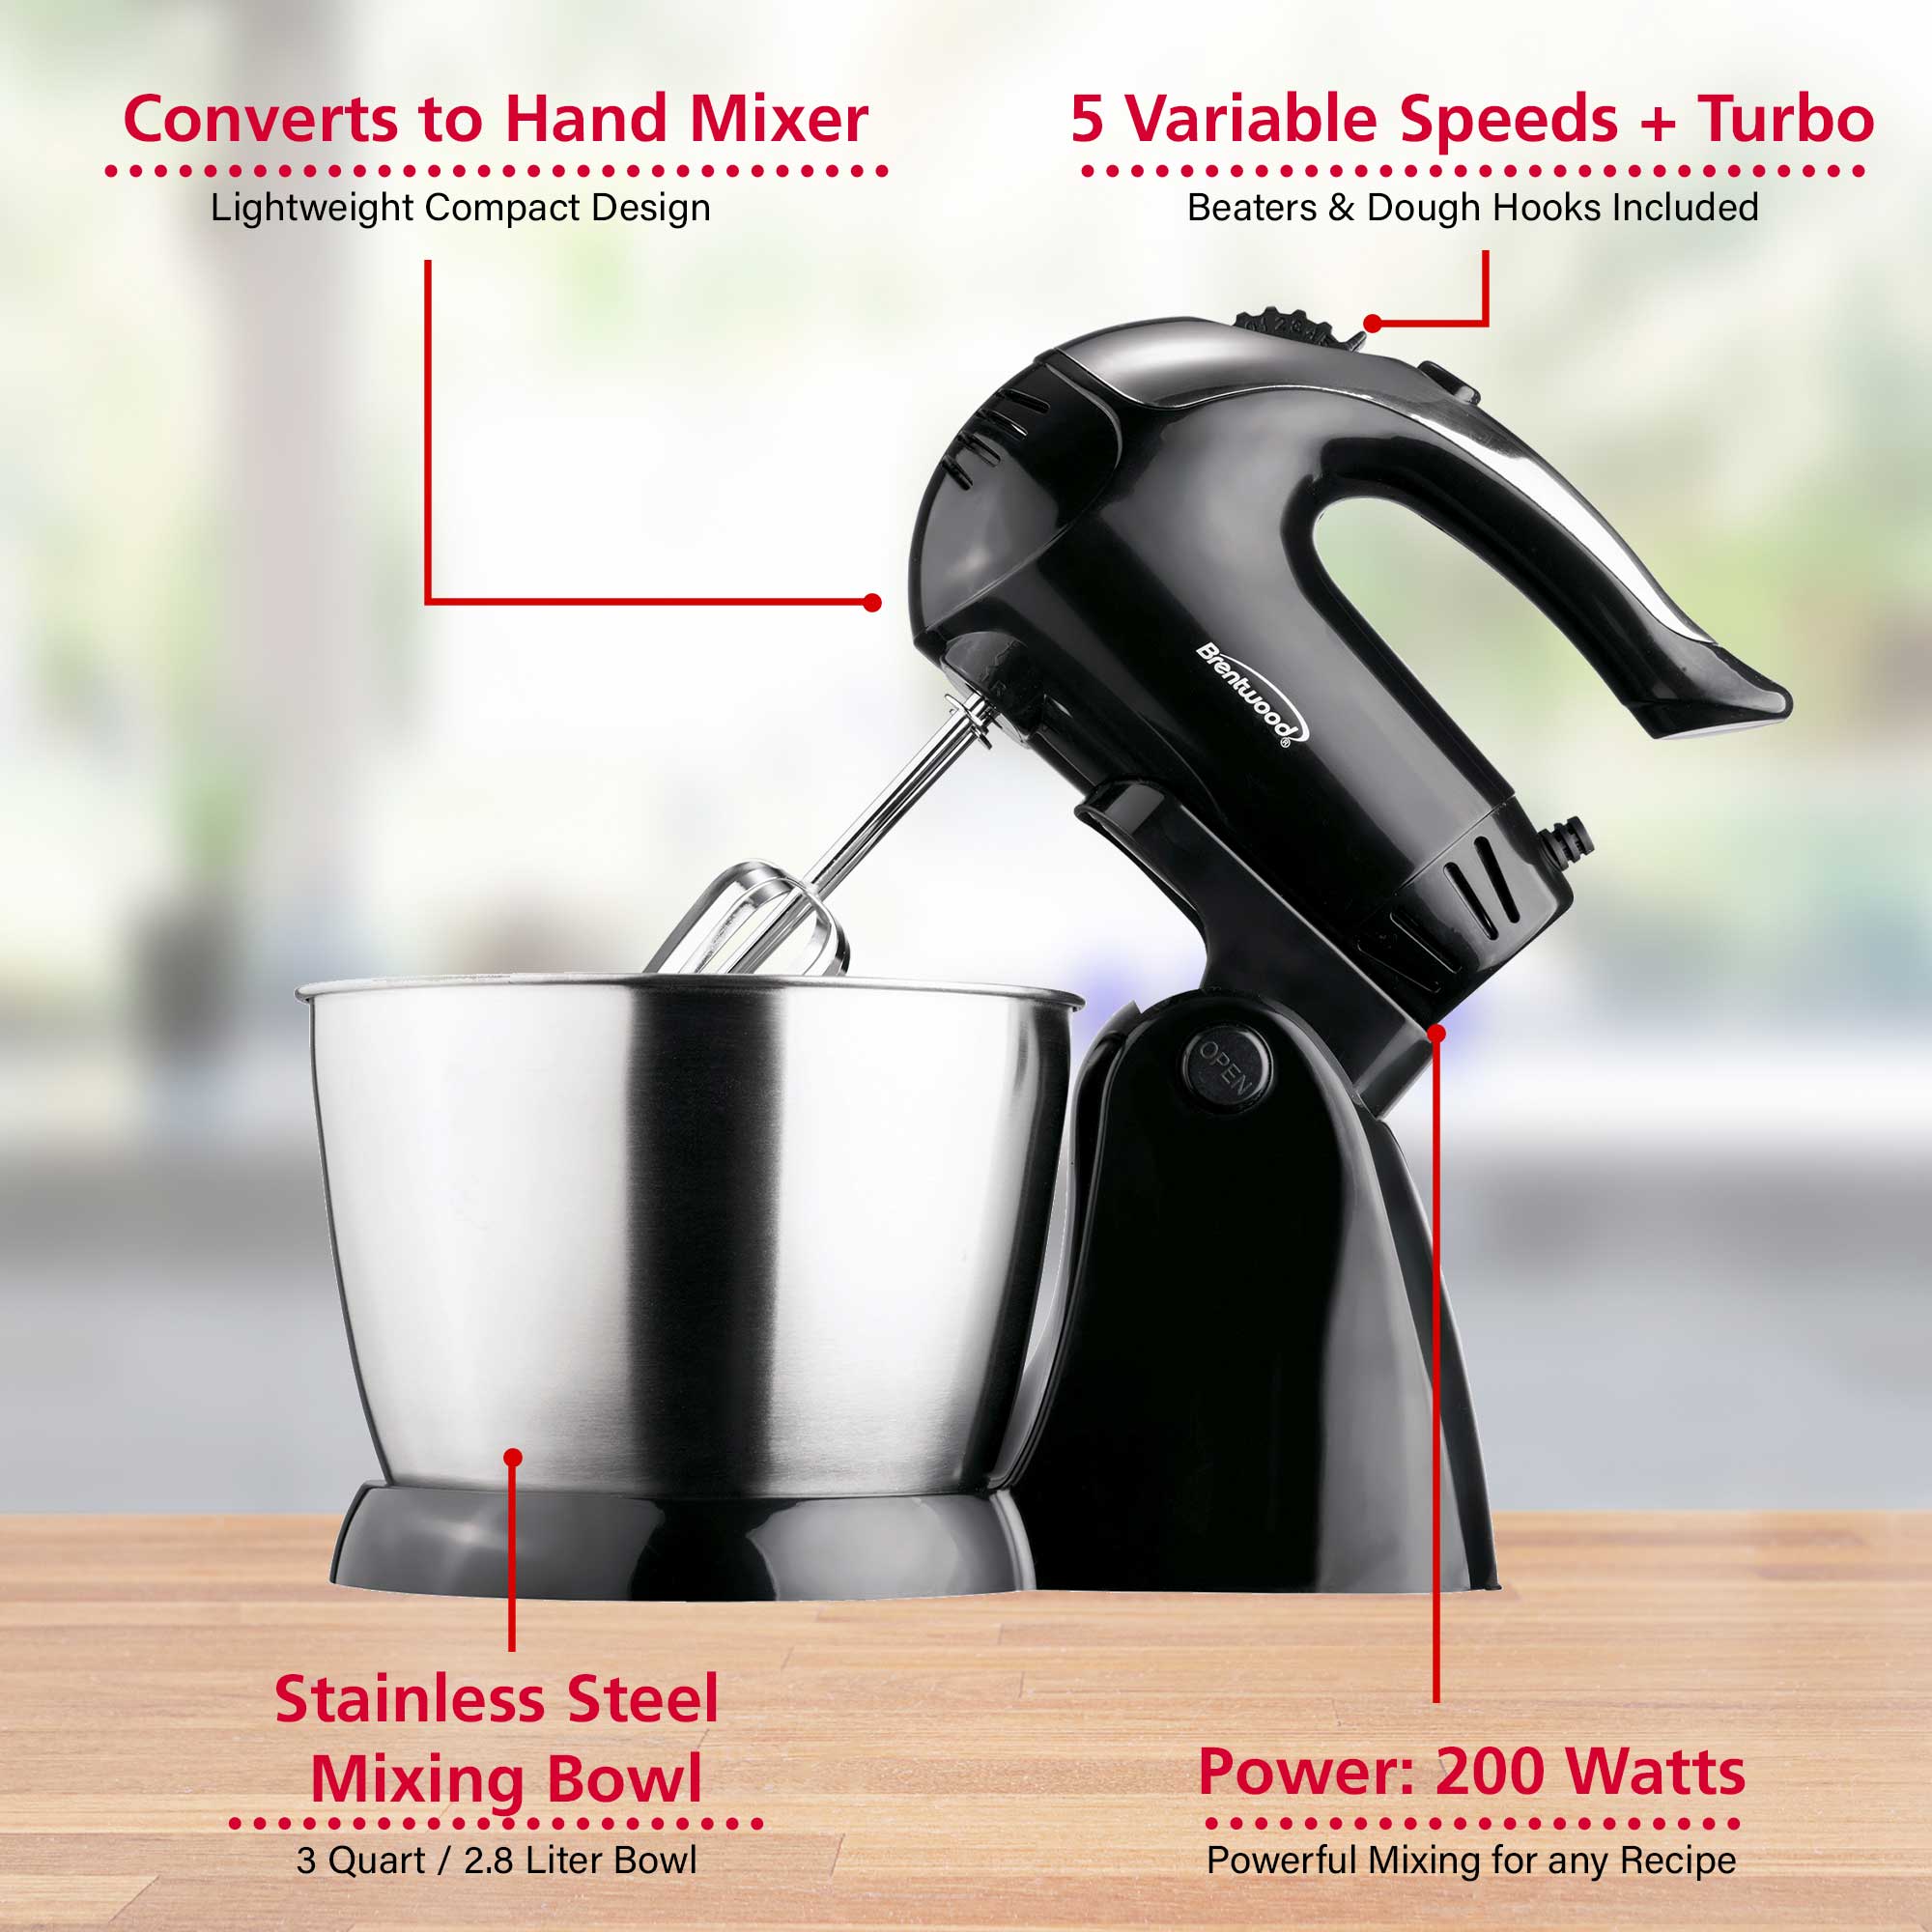 Brentwood SM-1153 5-Speed + Turbo Stand Mixer, Black - Brentwood Appliances